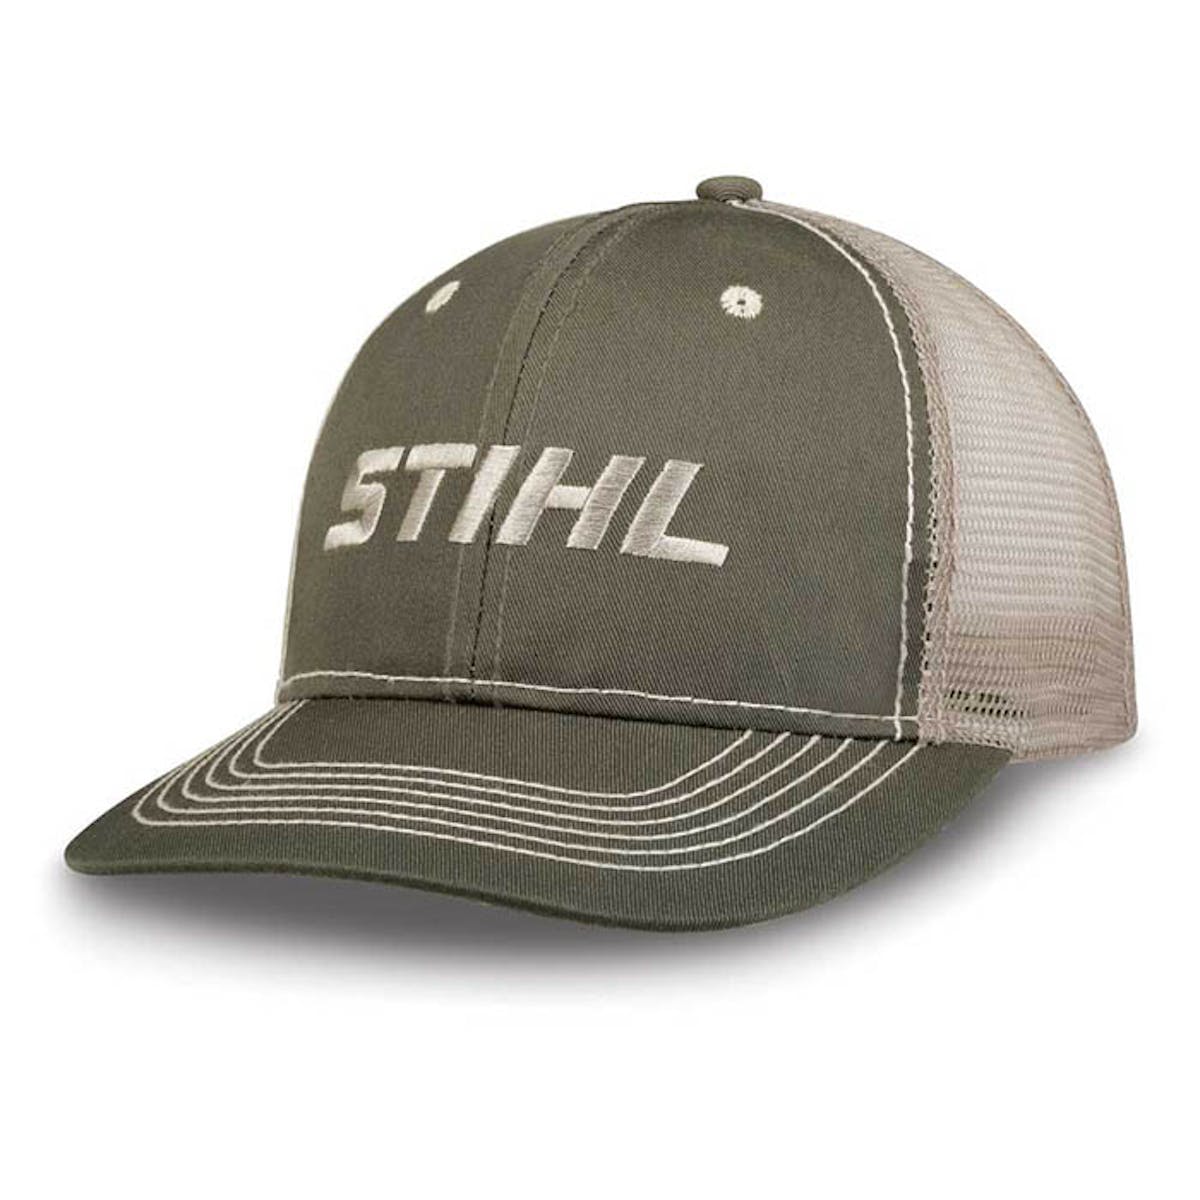 Olive and Tan Mesh Back Value Cap